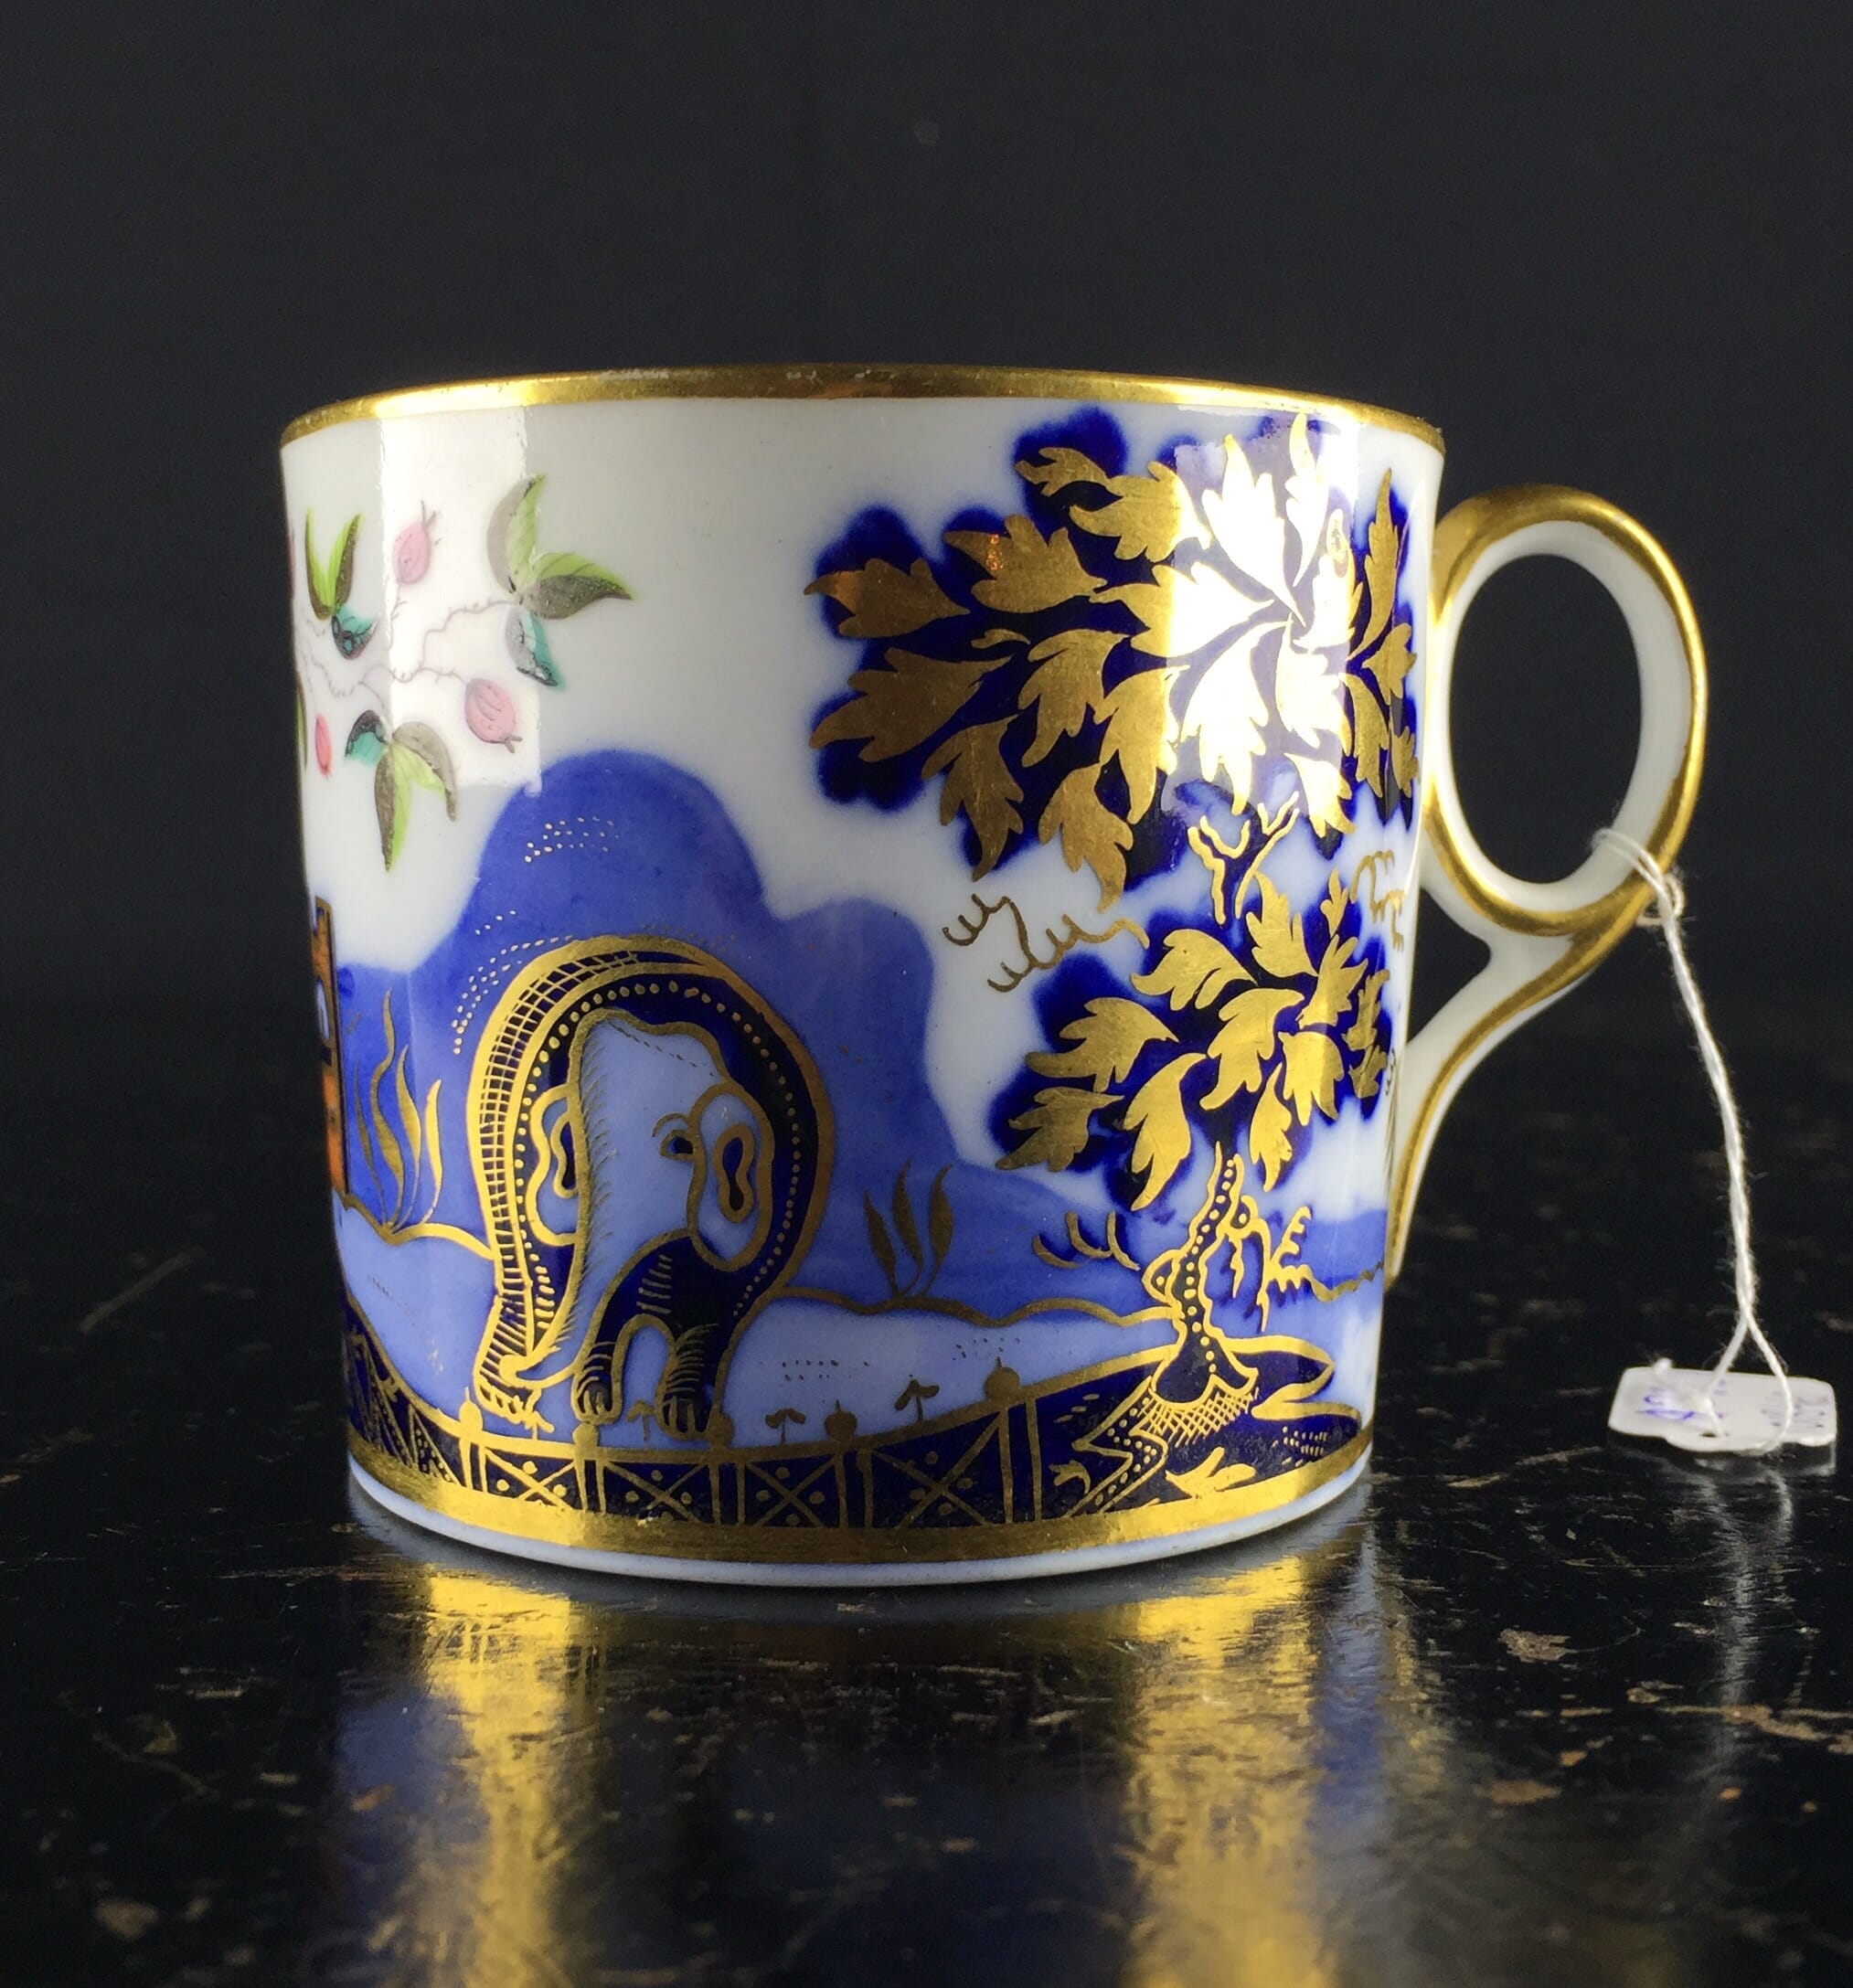 Newhall coffee can, 'Elephant' pattern 876, c. 1805-0